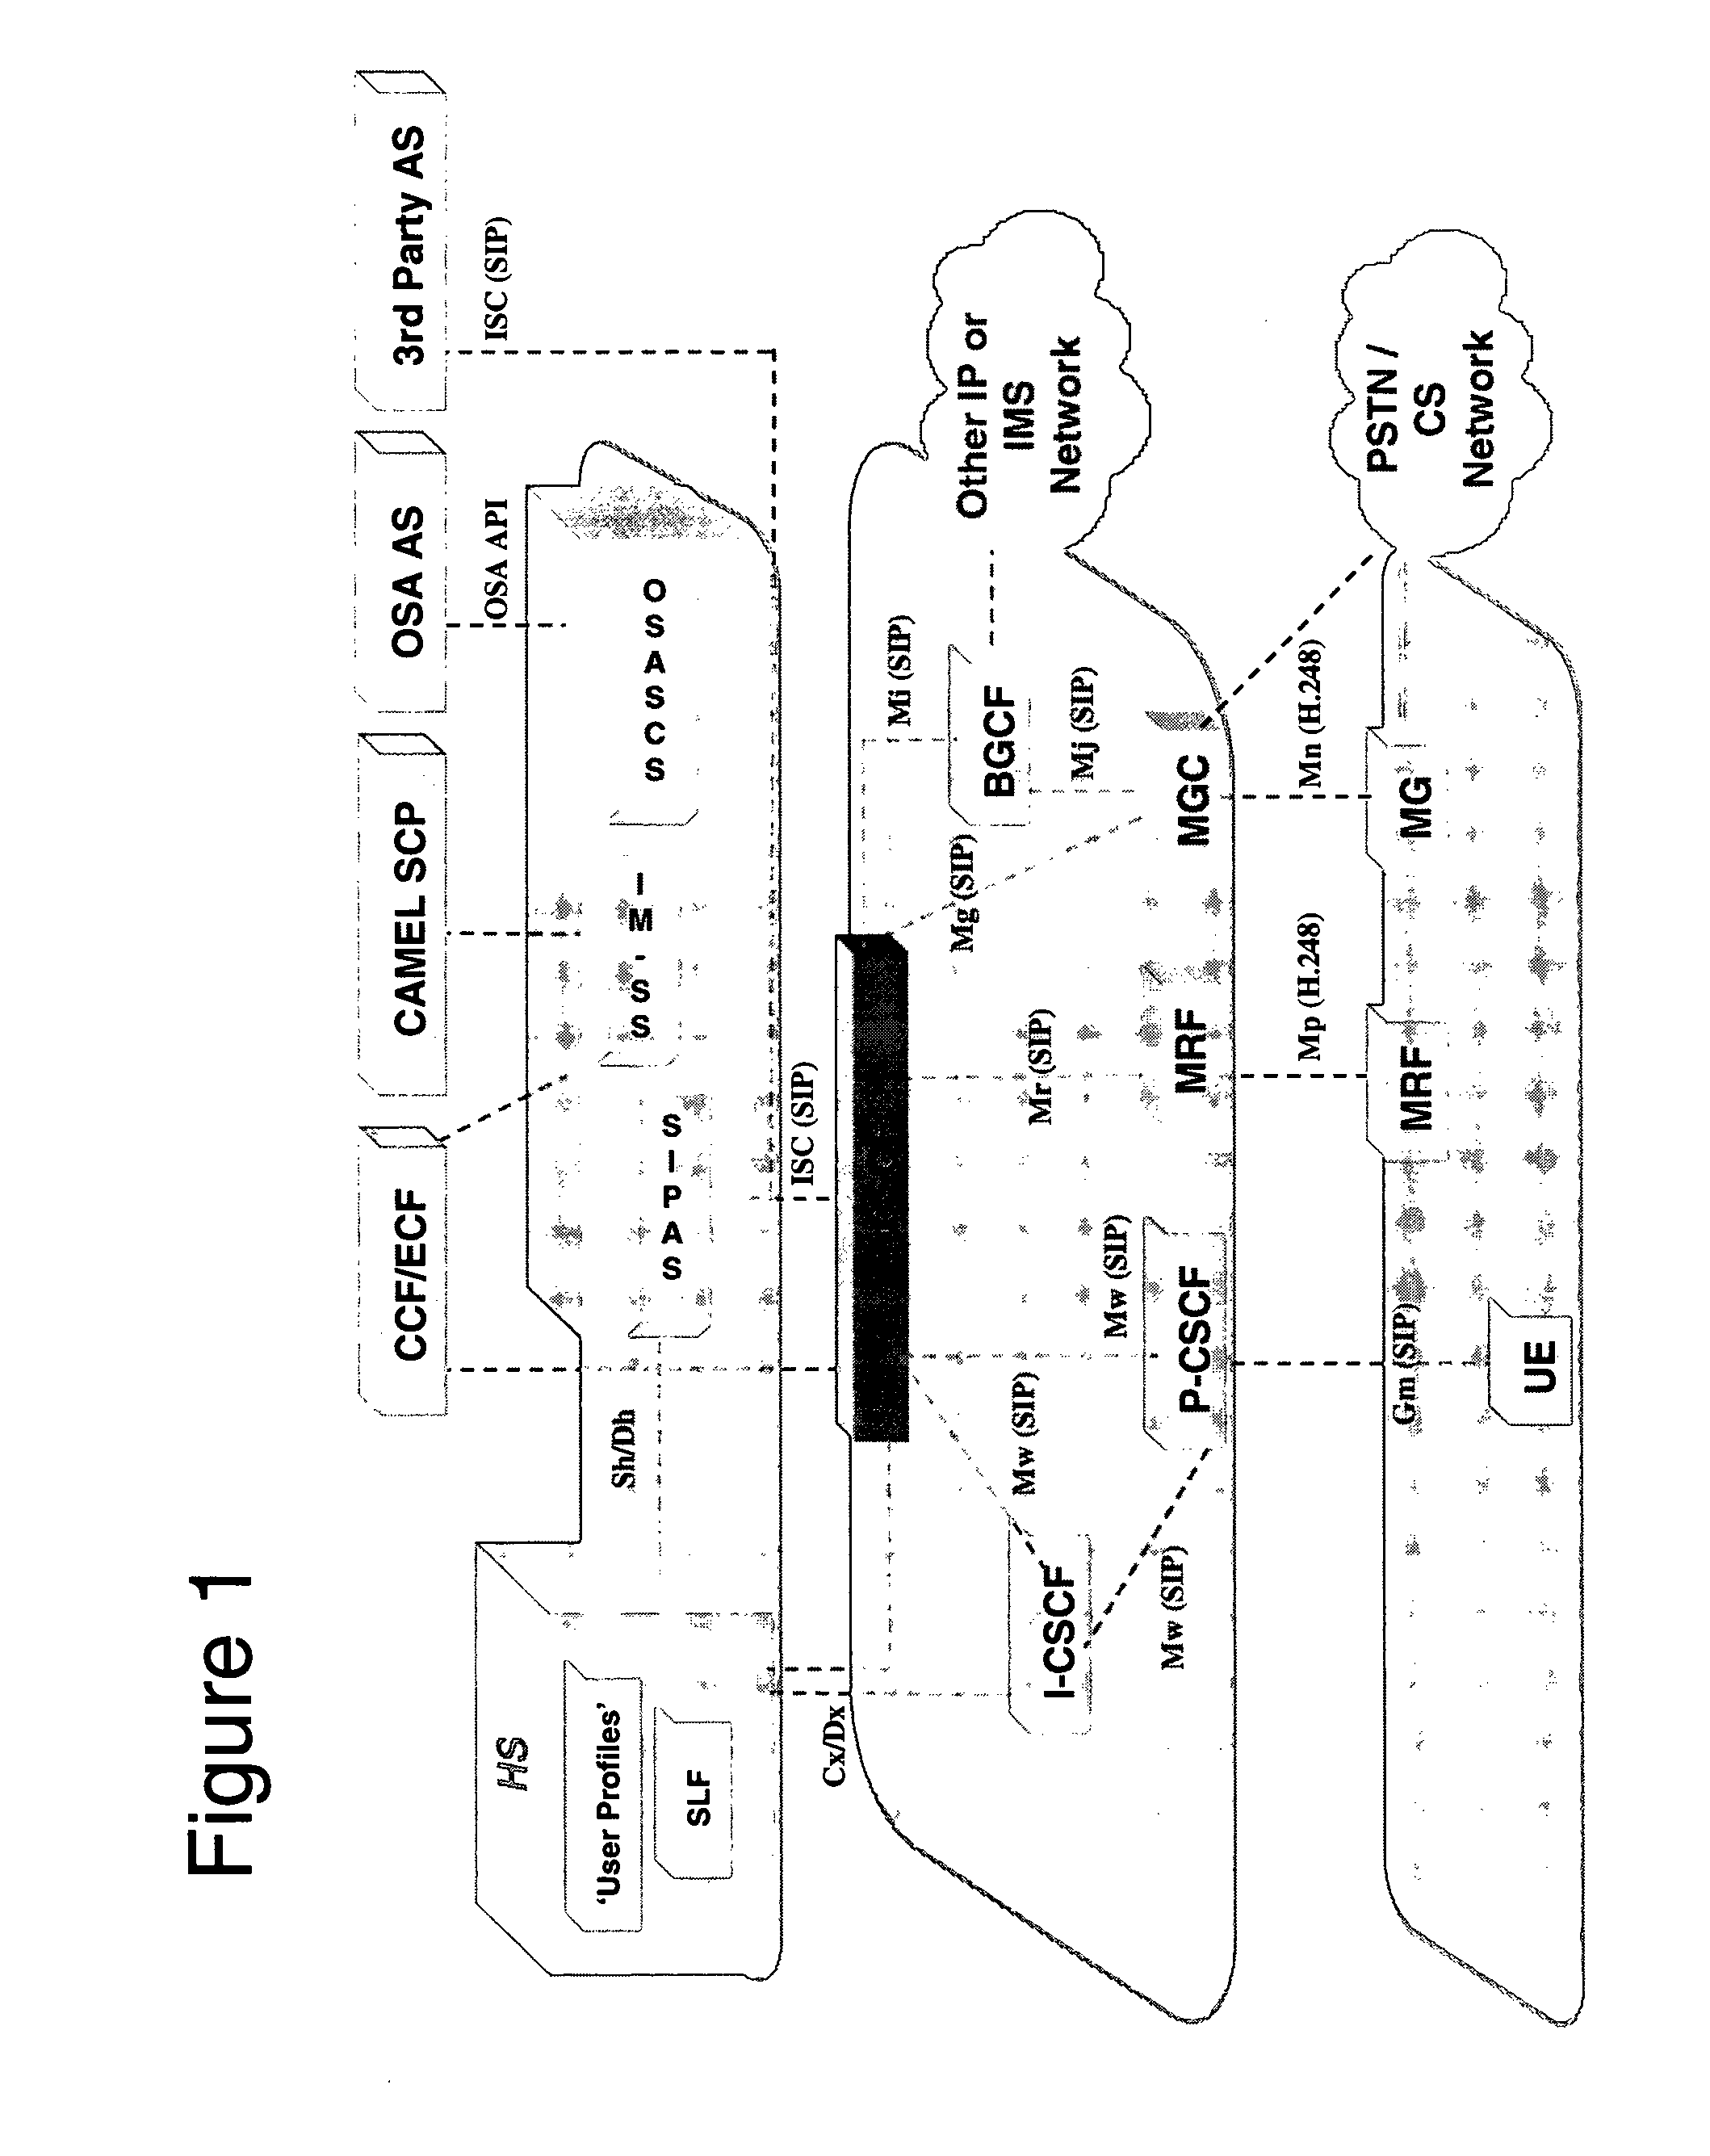 Digital home networks having a control point located on a wide area network